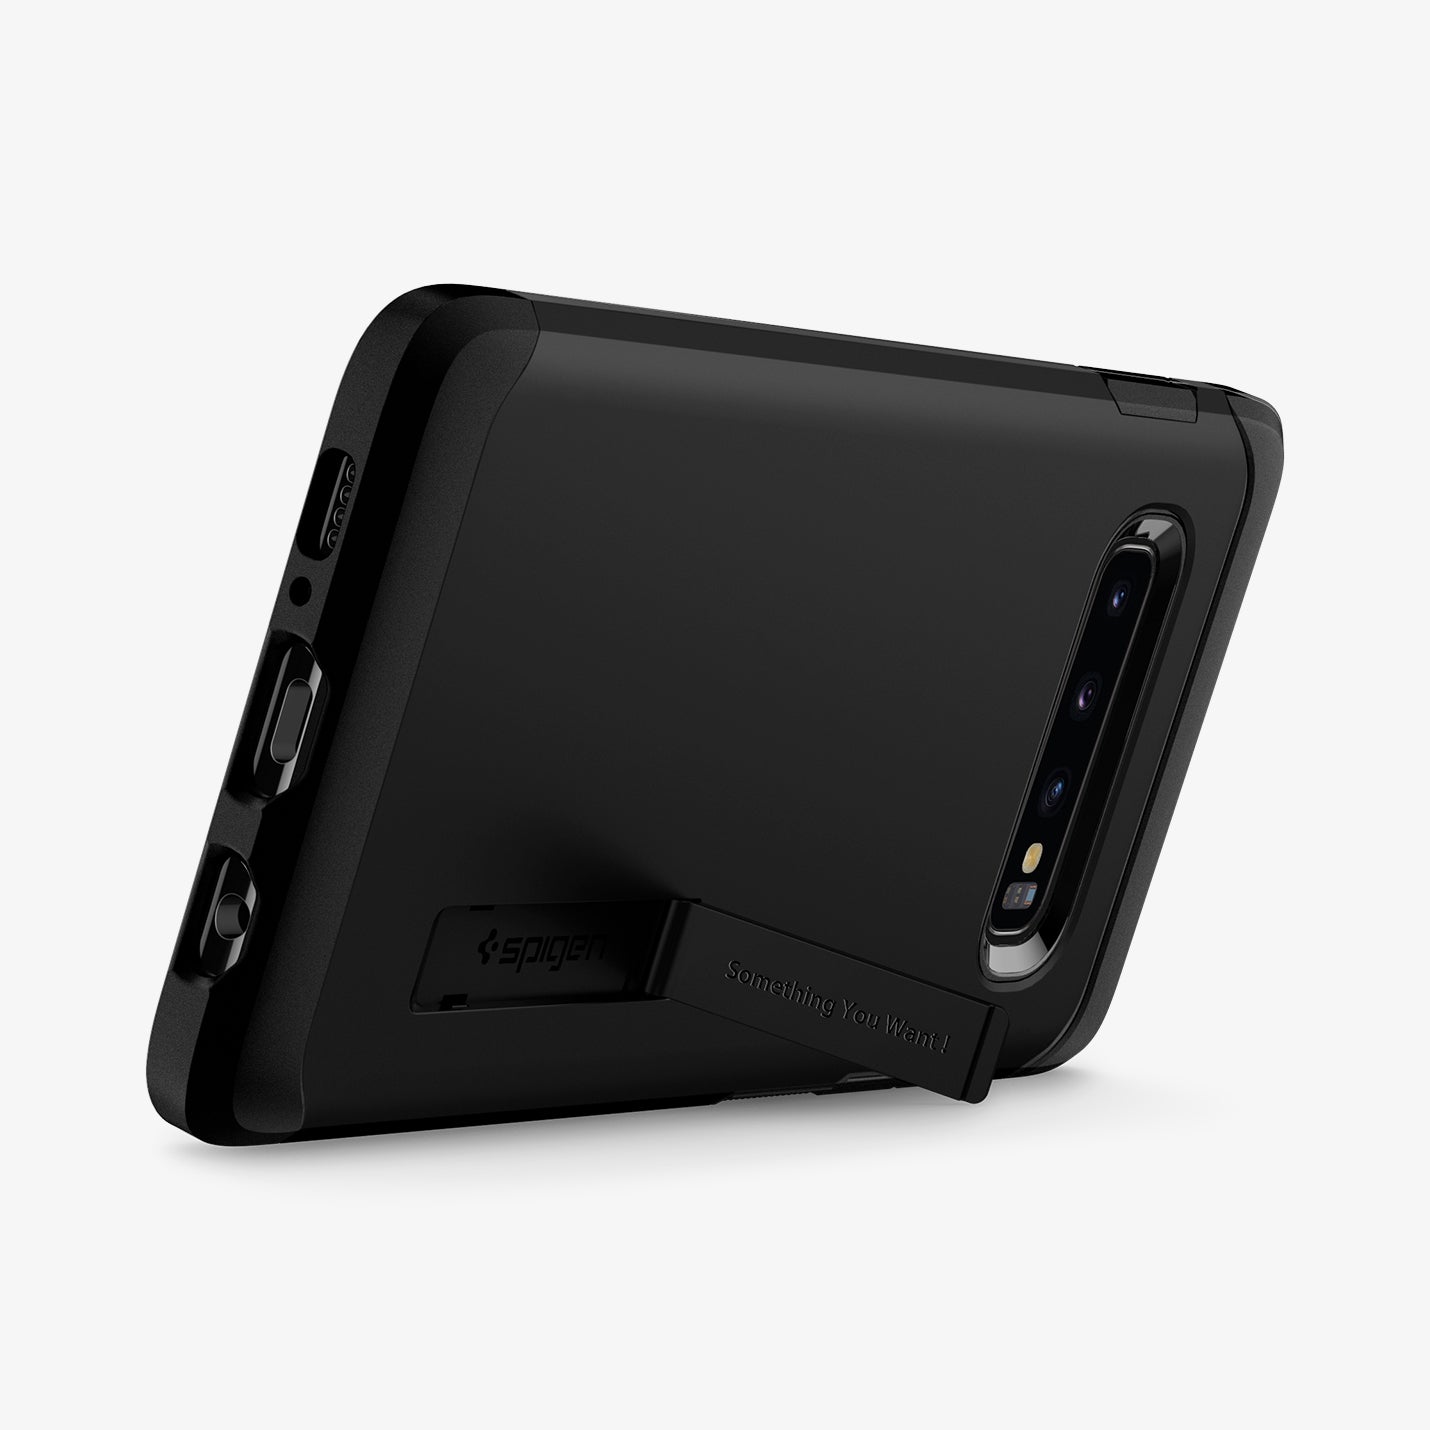 606CS25770 - Galaxy S10 Plus Tough Armor Case in black showing the back with device propped up by built in kickstand